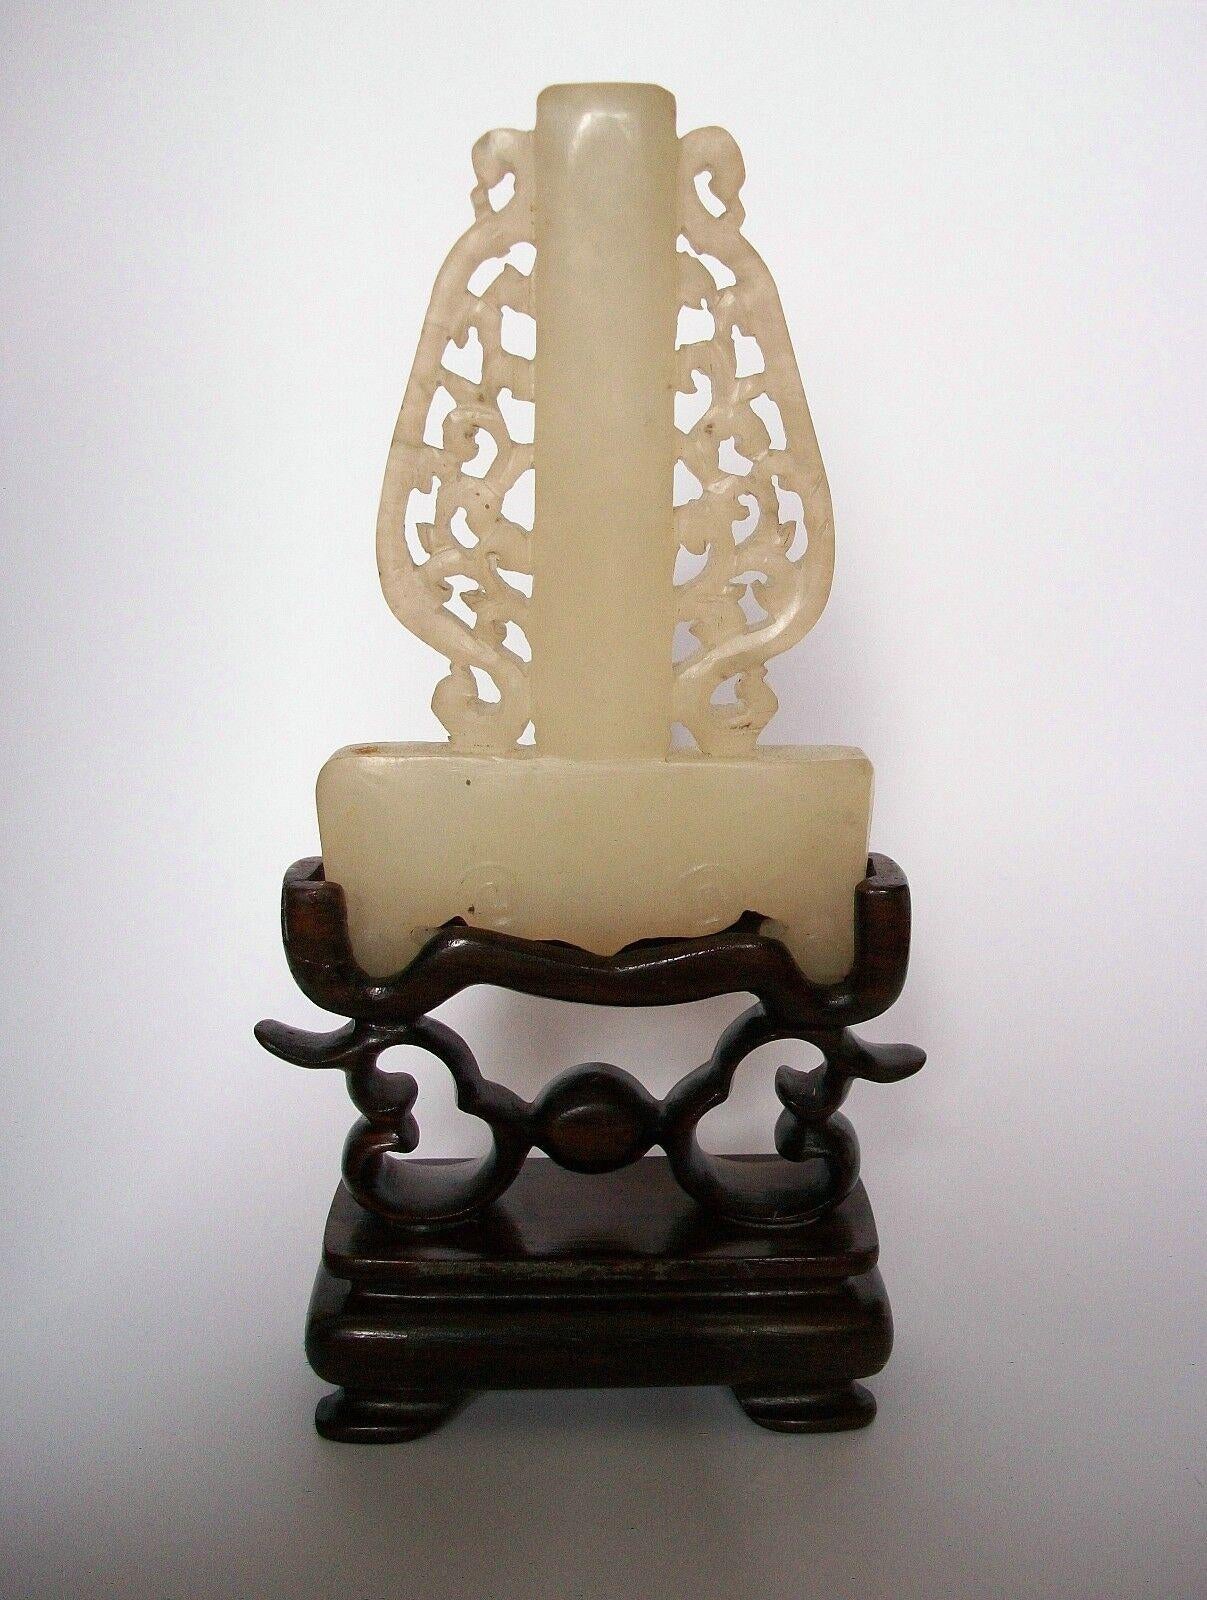 Mutton Fat jade amulet carving on elaborate hardwood stand - the hand carved jade with pierced scrolling vines and solid base and central column - the hand carved fitted stand featuring clouds above a plinth and raised on four scrolling feet -